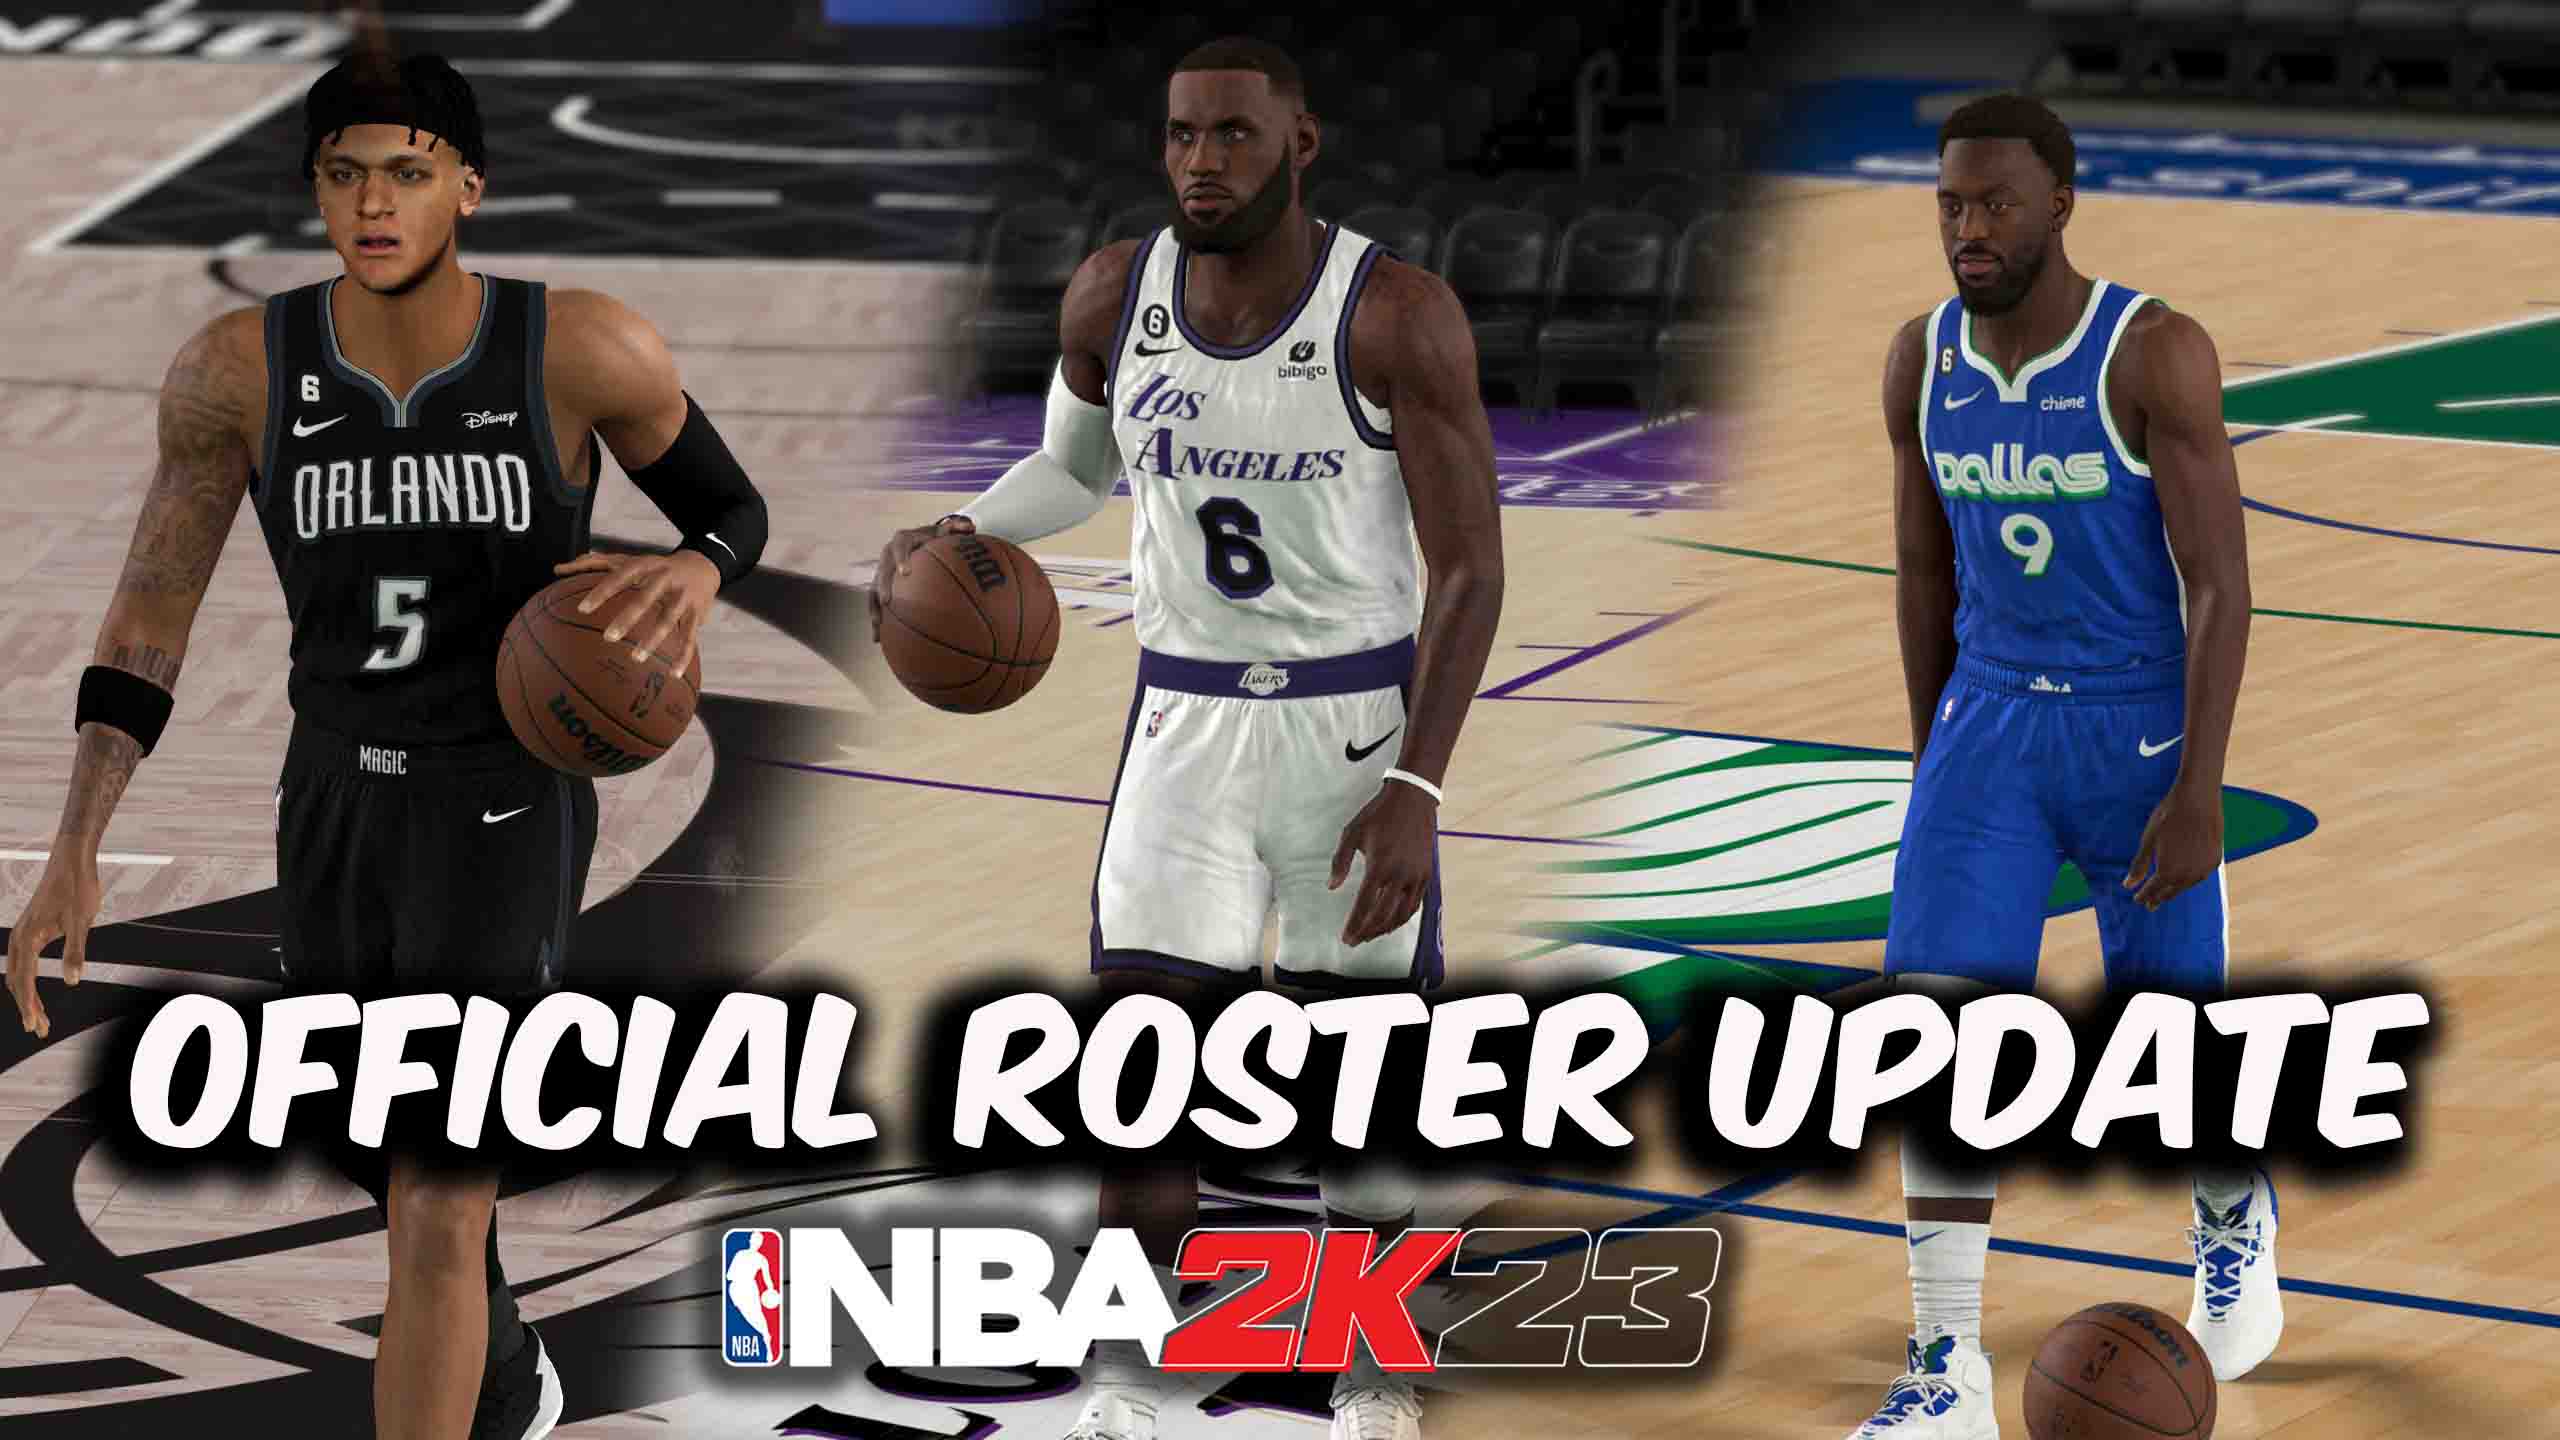 NBA 2K23 New Official Statement & Classic Jerseys added for NBA Teams in  today's roster update 